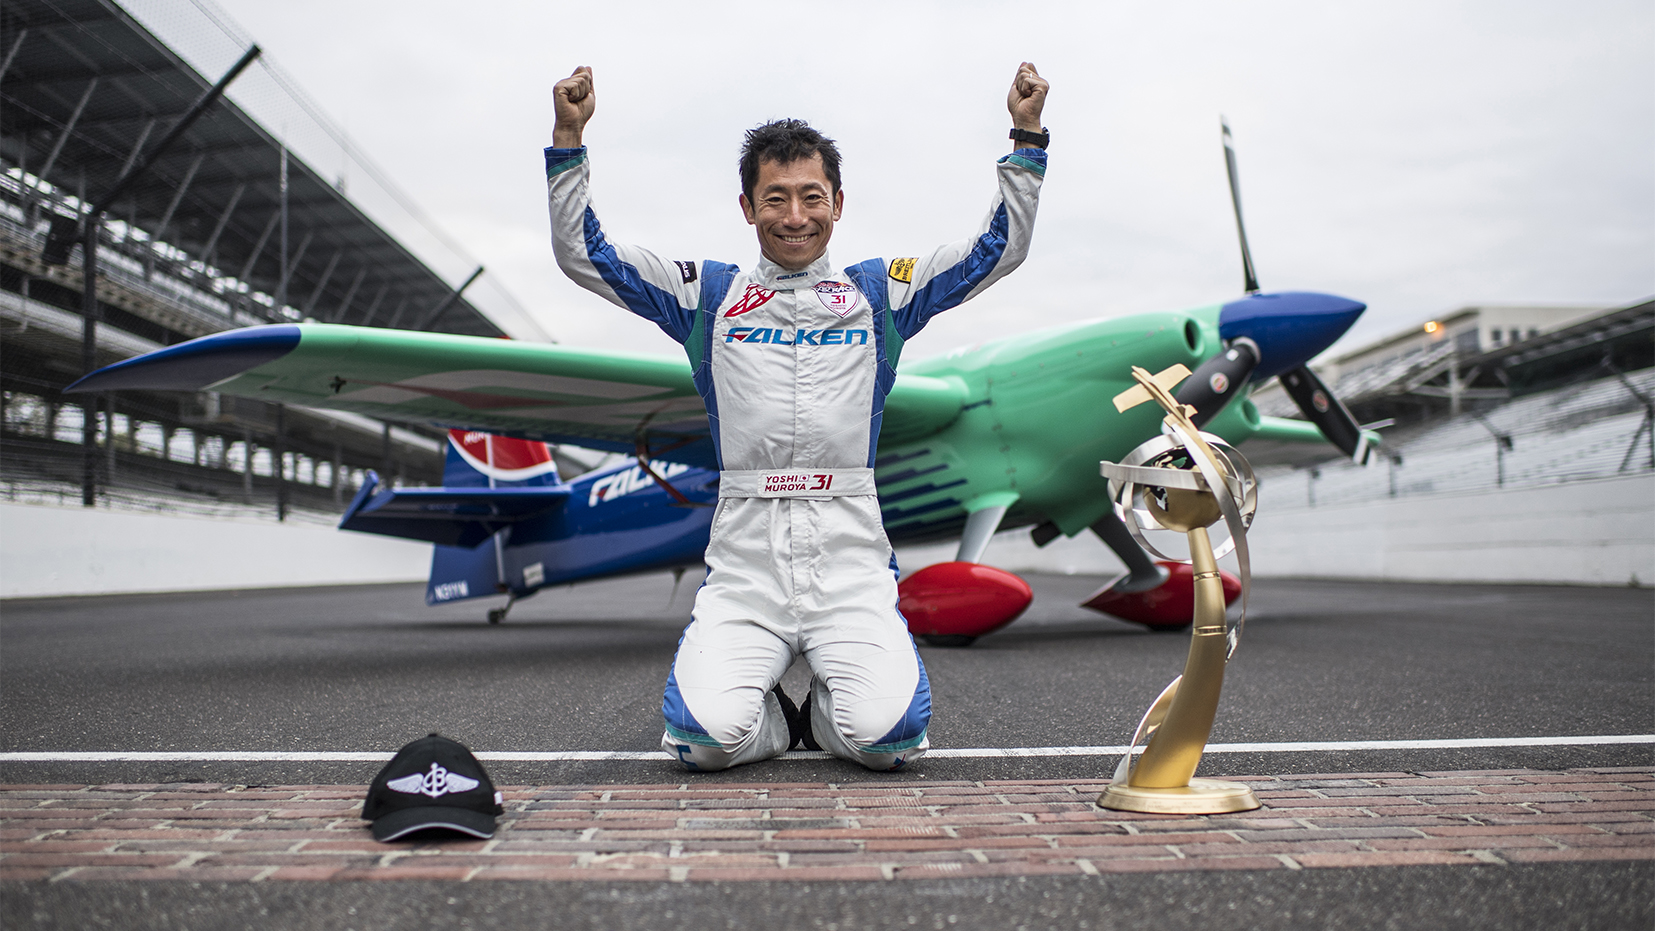 Yoshihide Muroya of Japan poses for a photograph after he won at the eighth round of the Red Bull Air Race World Championship at Indianapolis Motor Speedway. Photo by Joerg Mitter / Red Bull Content Pool.